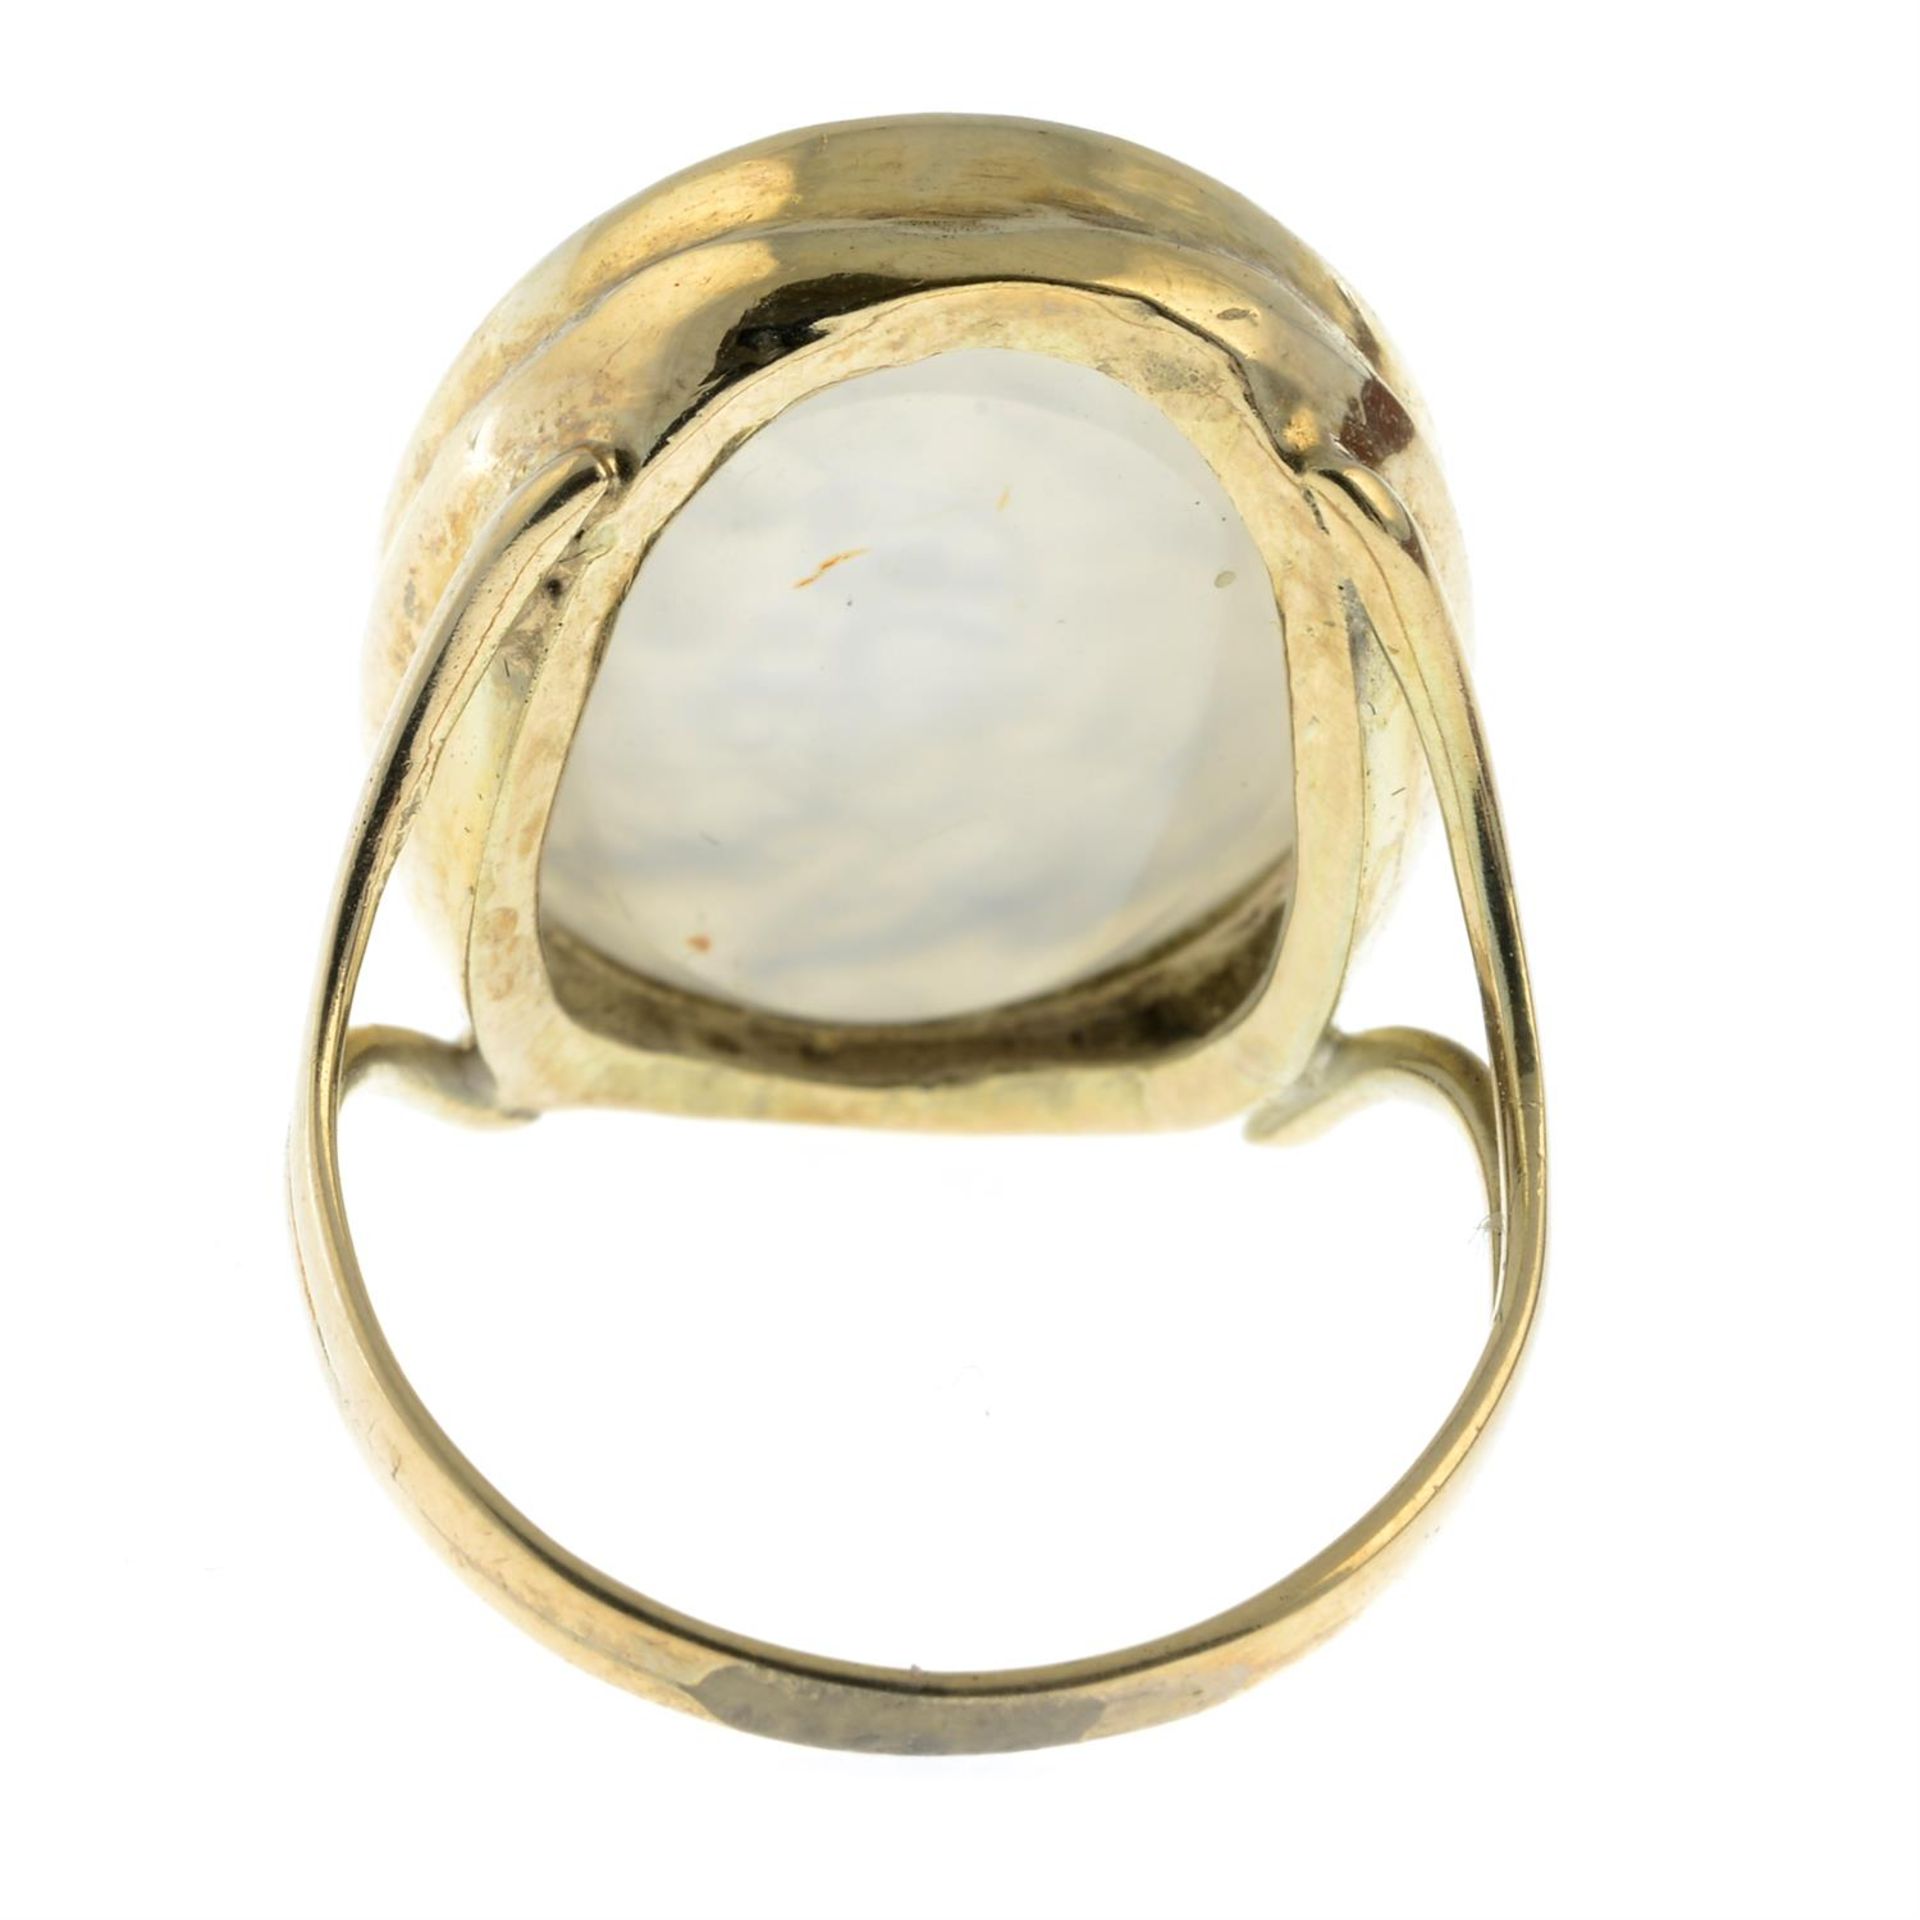 A chalcedony intaglio ring, carved to depict Hercules wearing the Nemean lion pelt. - Image 4 of 5